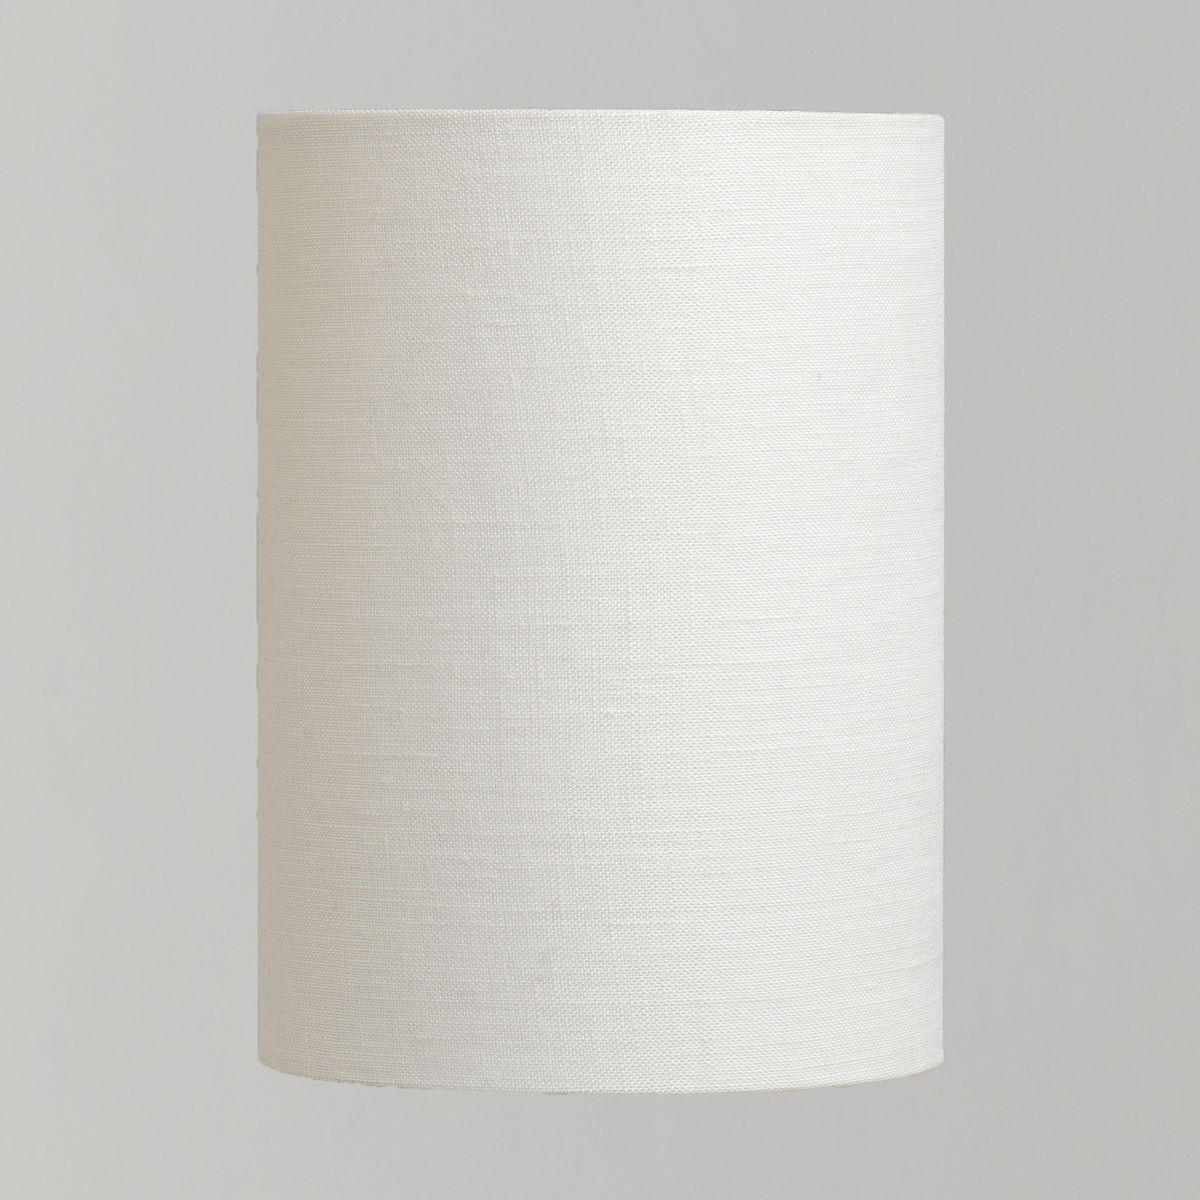 Cylindrical cream lampshade detail